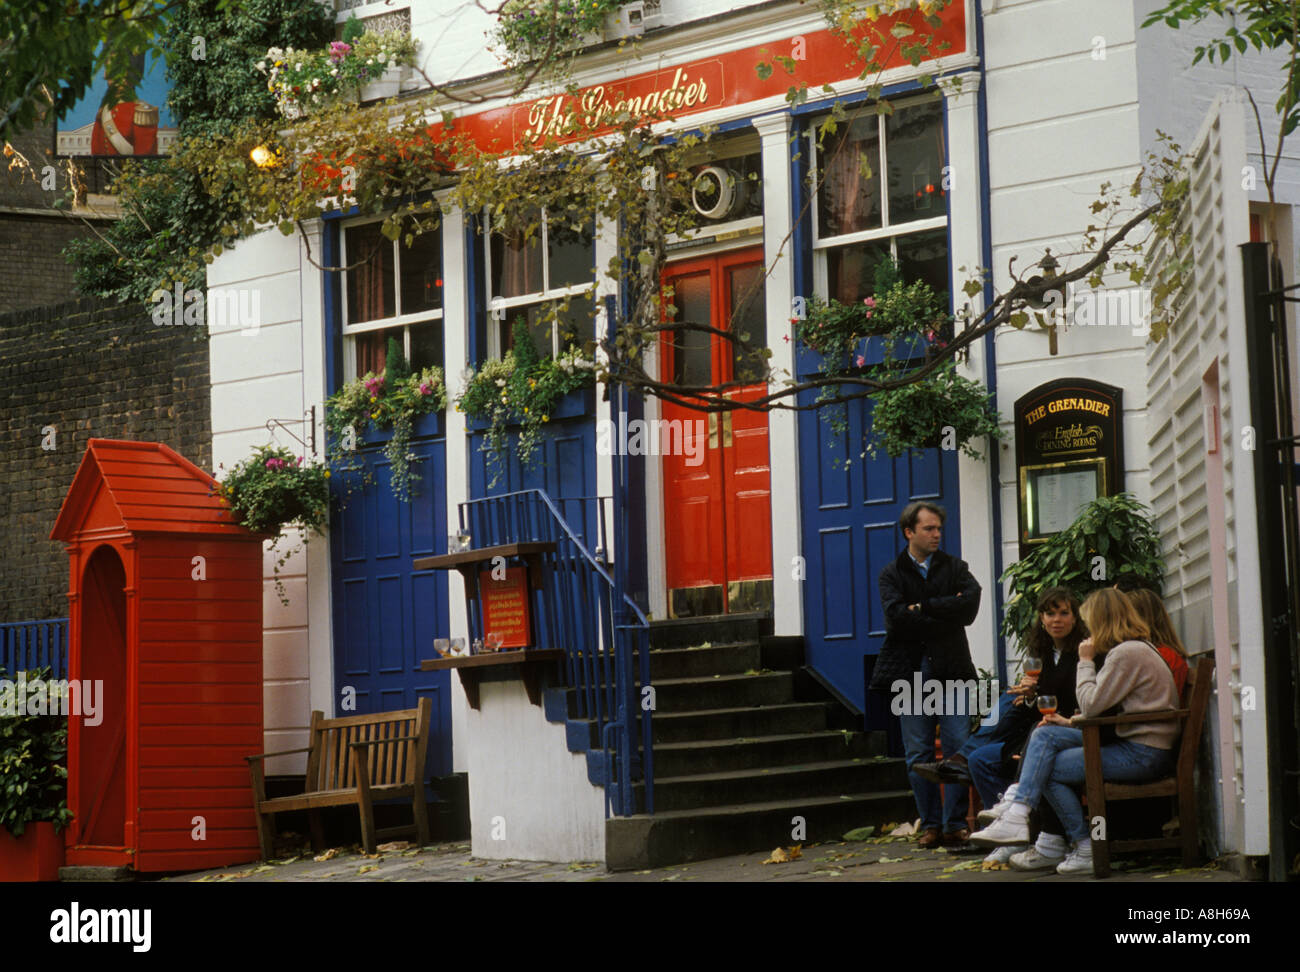 Grenadier pub, group people outside of the front of building. Near Hyde Park, Wilton Row, Wilton Mews, Belgravia, London England. 1990s Stock Photo